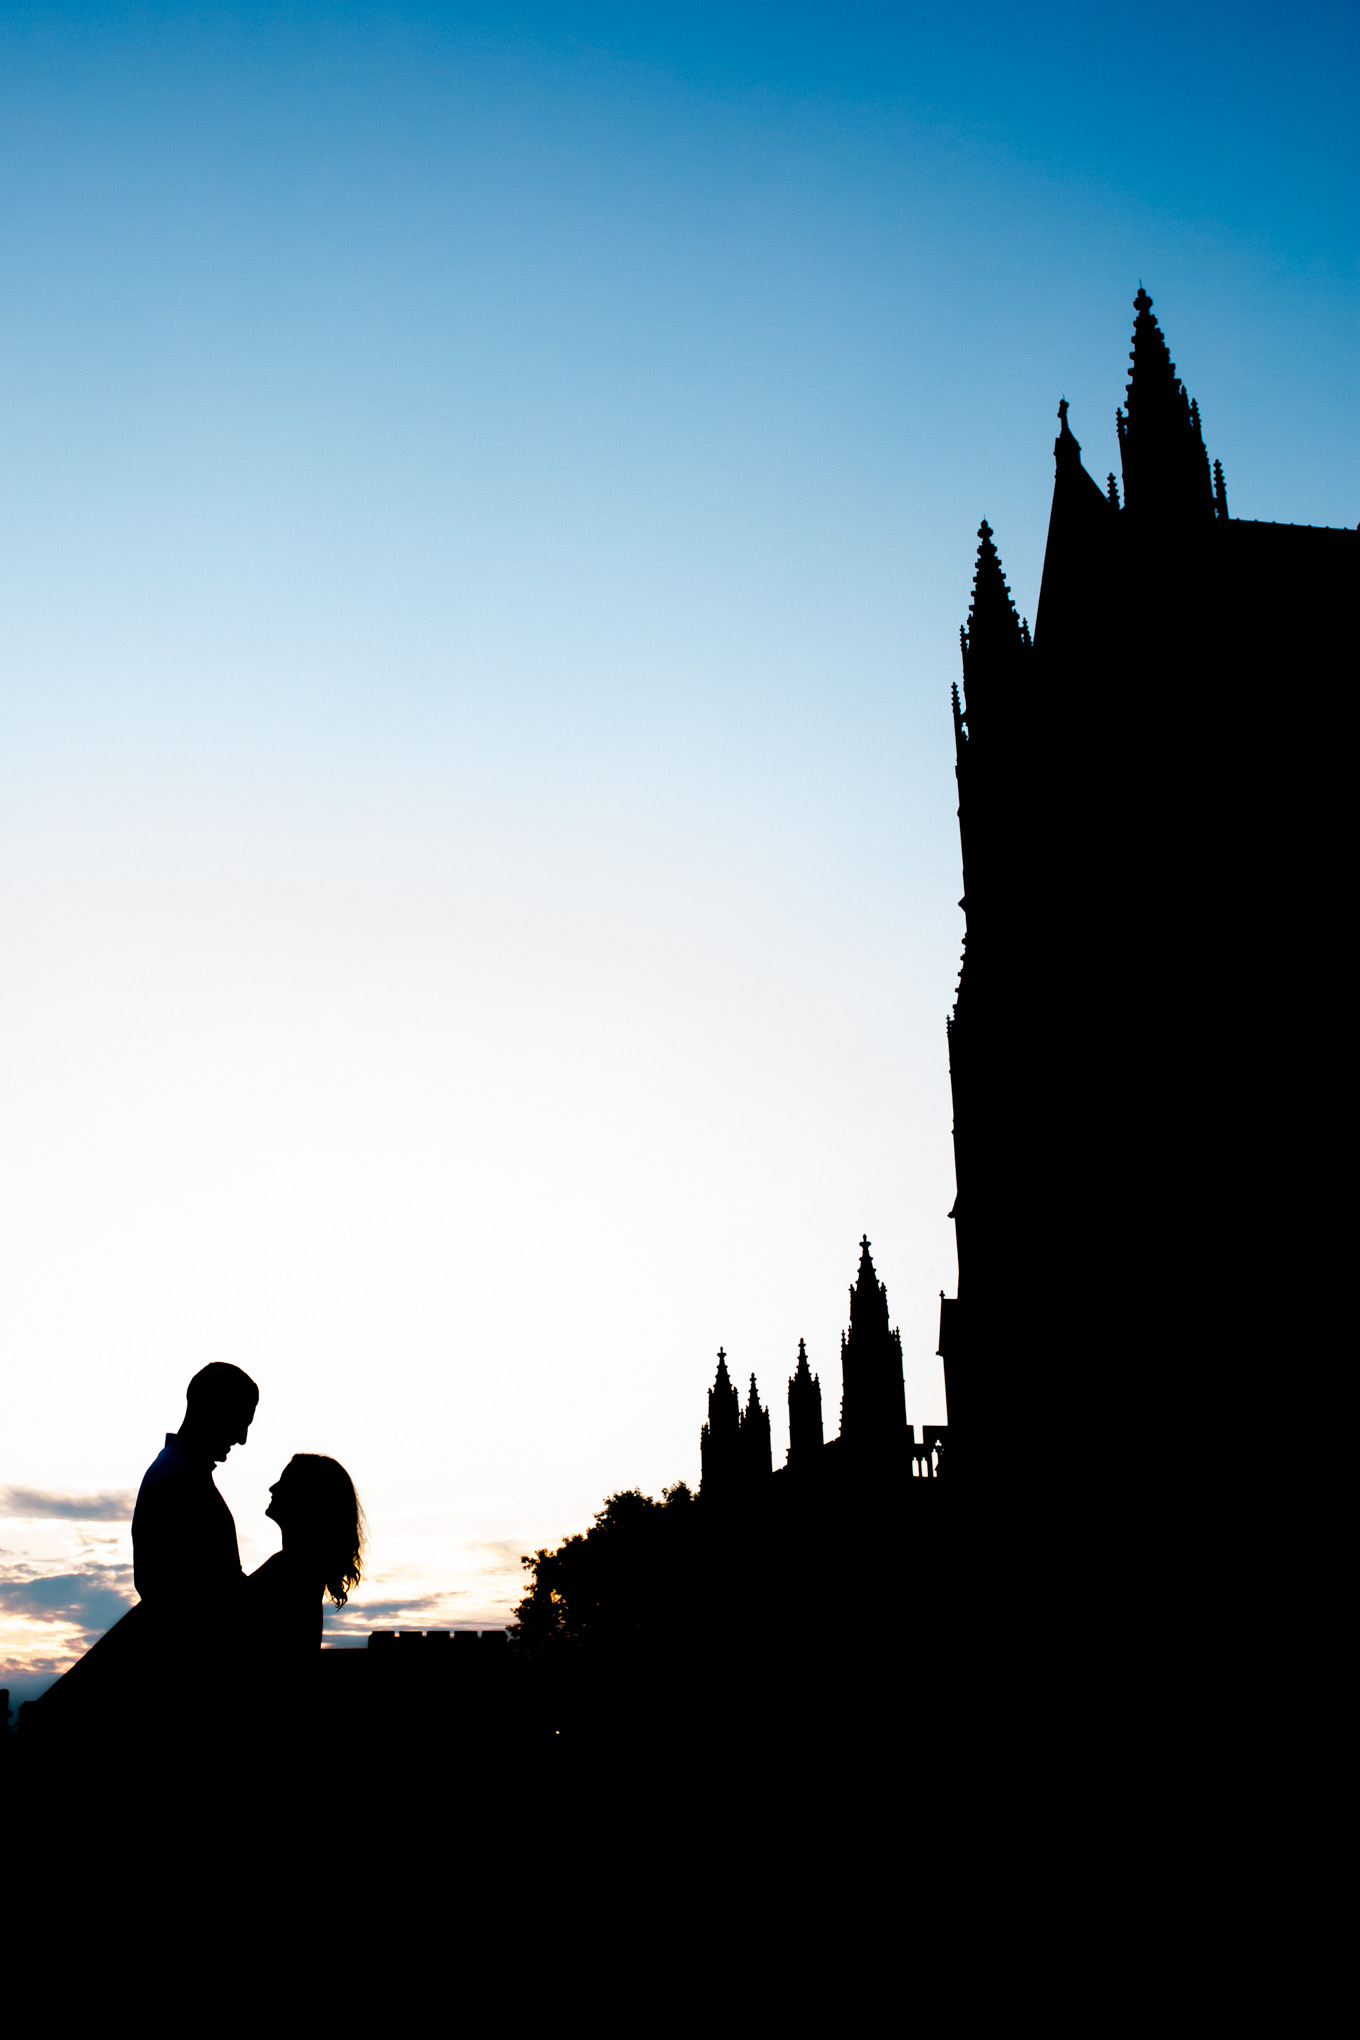 National Cathedral engagement photos, National Cathedral, D.C. engagement photos, classic engagement portraits, Washington National Cathedral, natural light engagement photos, D.C. engagement photographer, Rachel E.H. Photography, sunrise engagement photos, silhouette